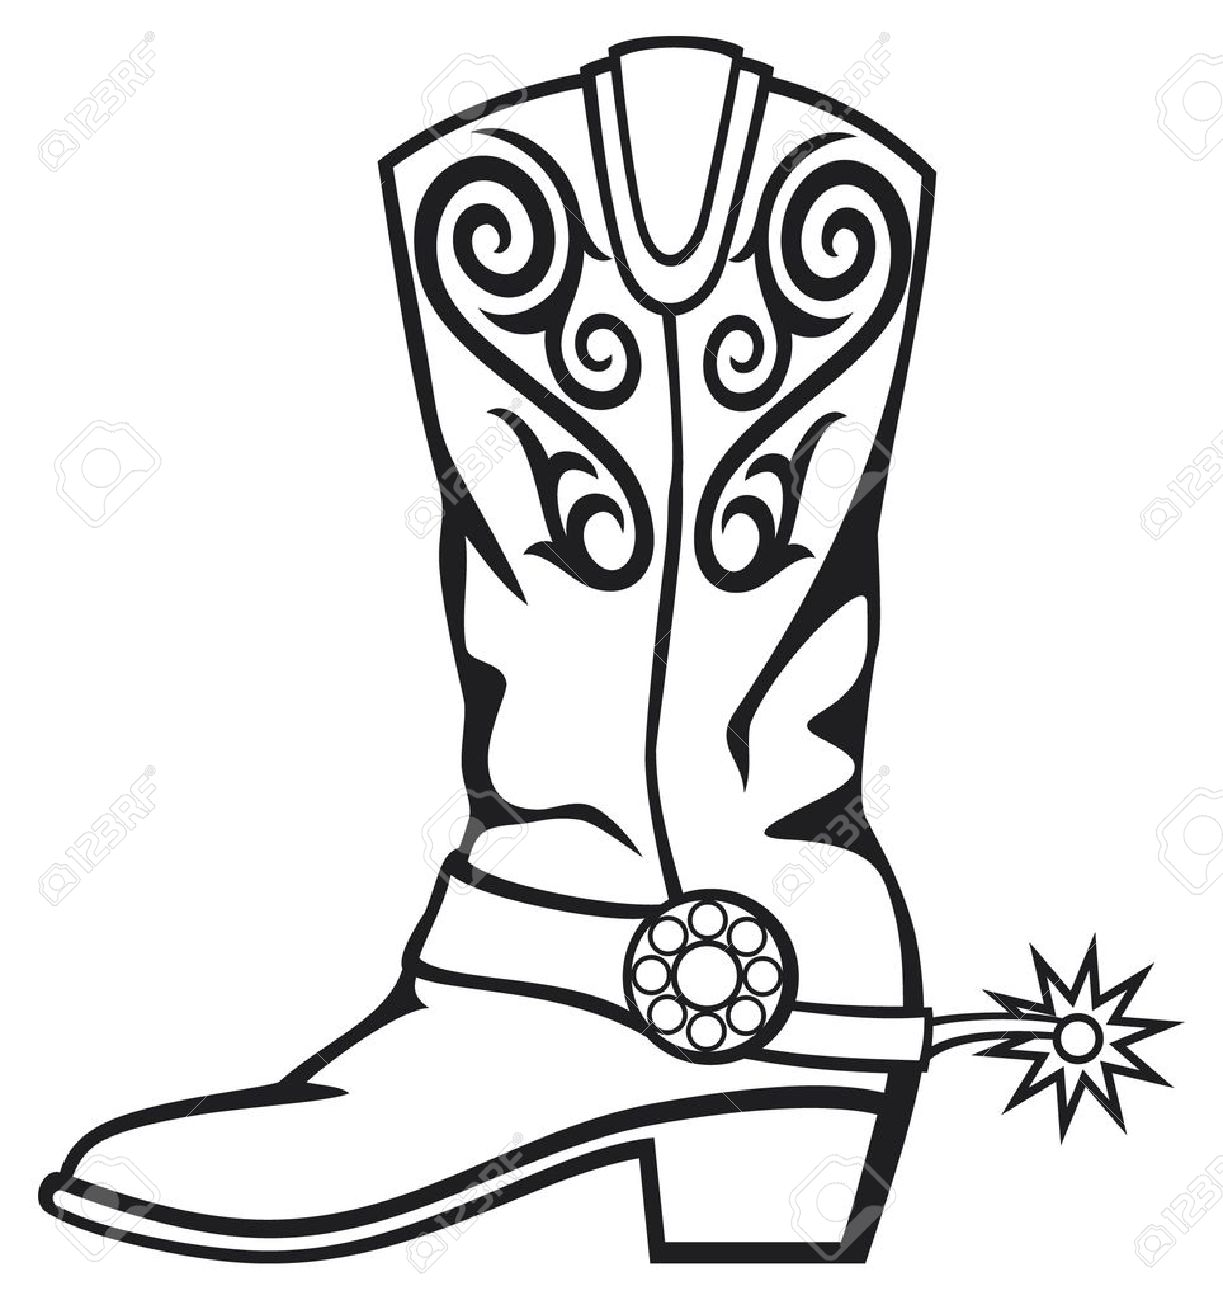 Cowboy boot boot silhouette c